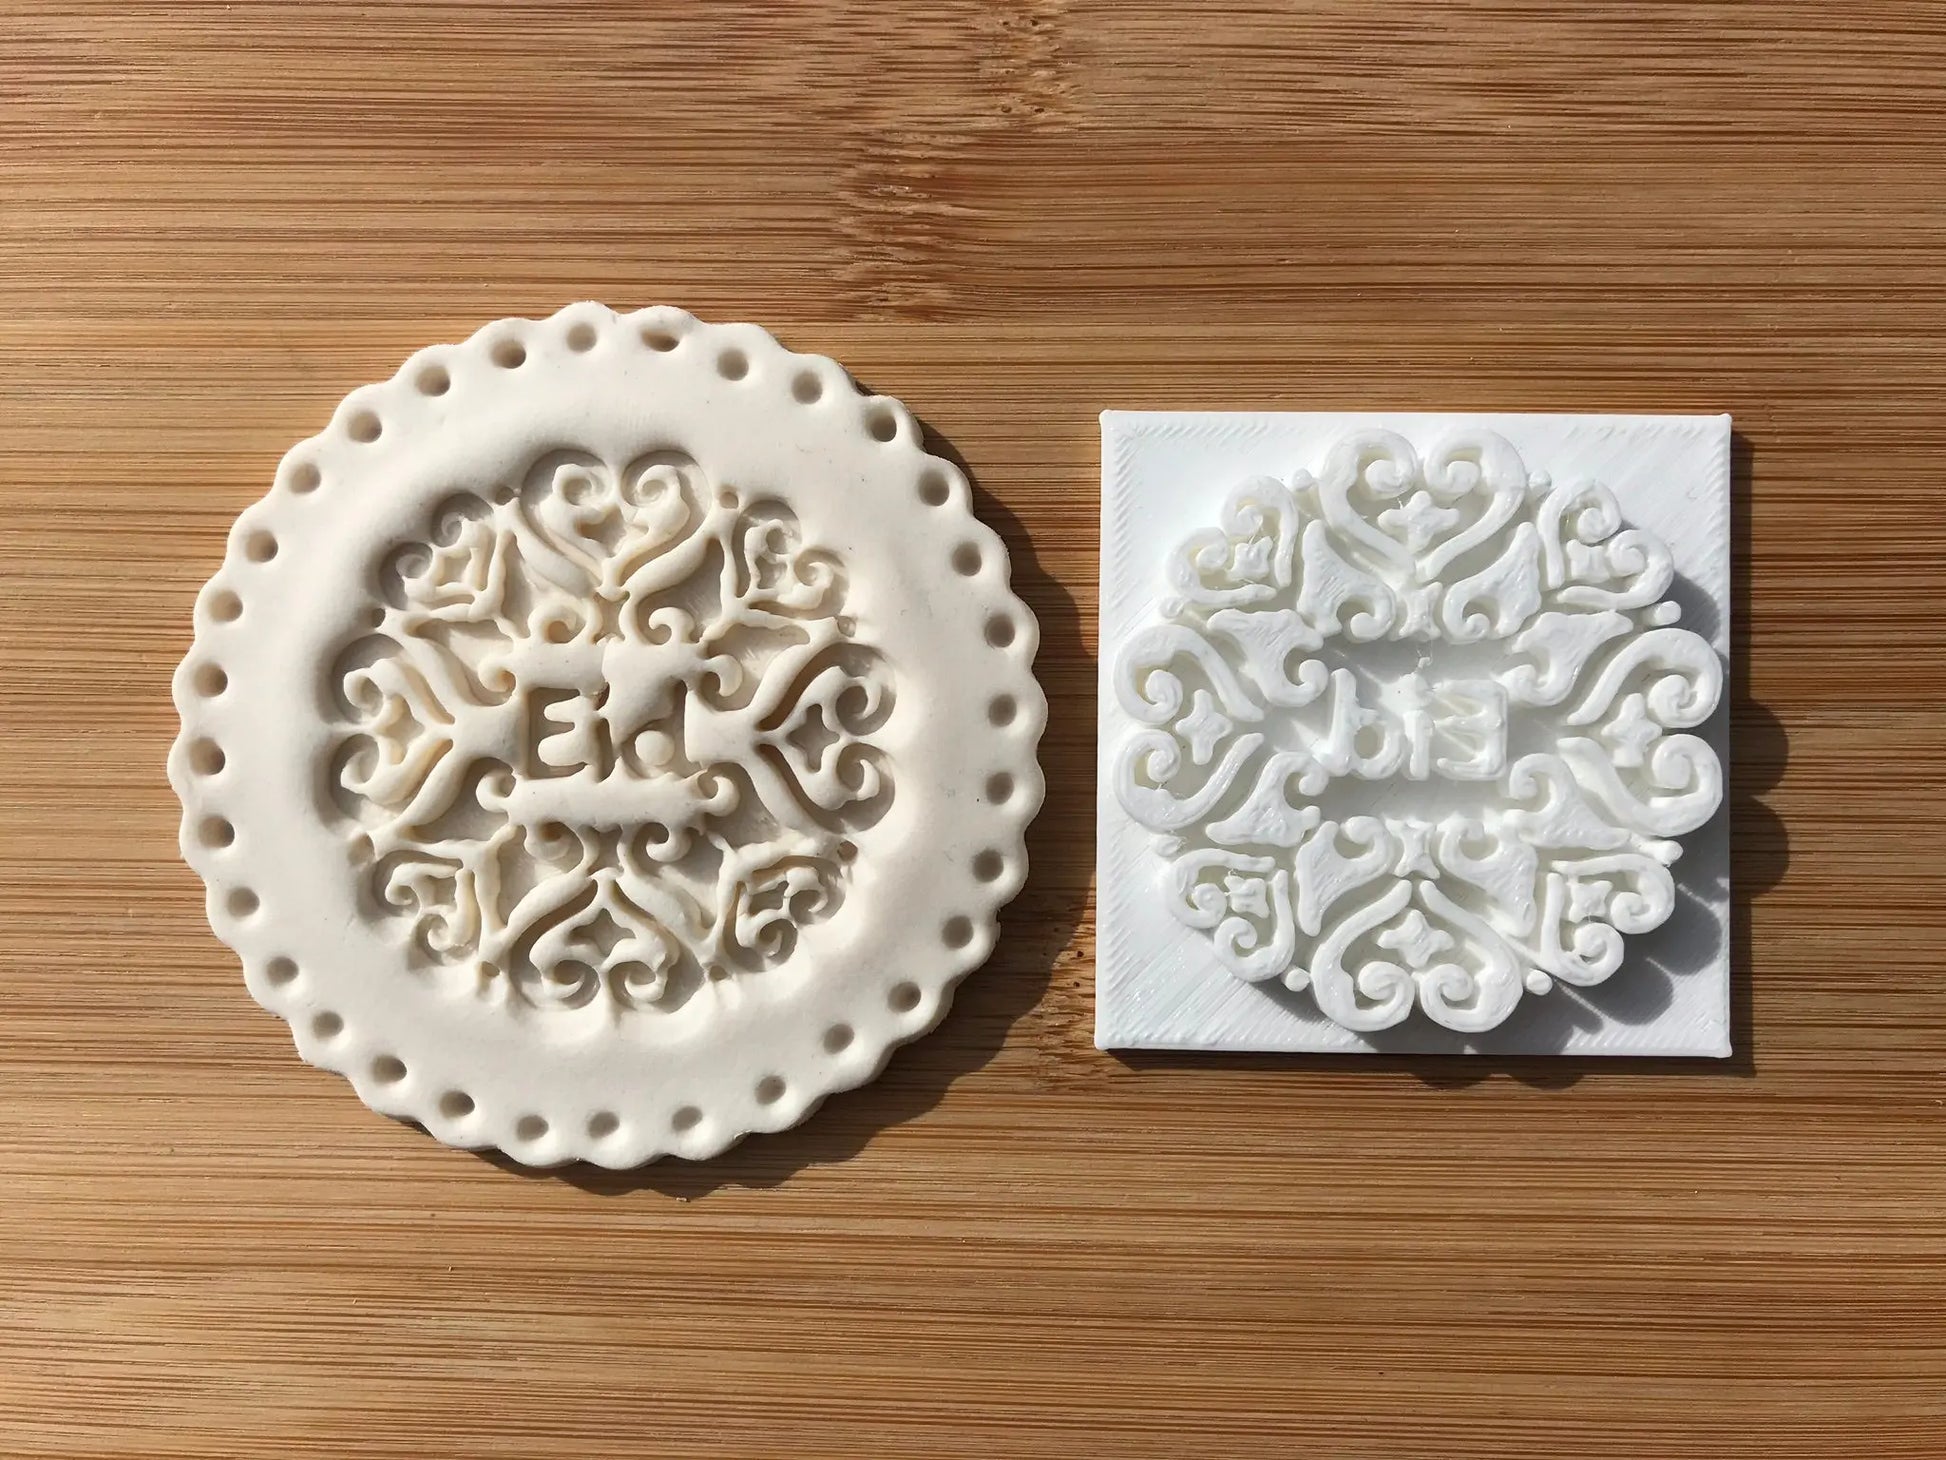 Muslim Islamic Embossing for cupcake and cake - stamps sugar paste Design 2 MEG cookie cutters